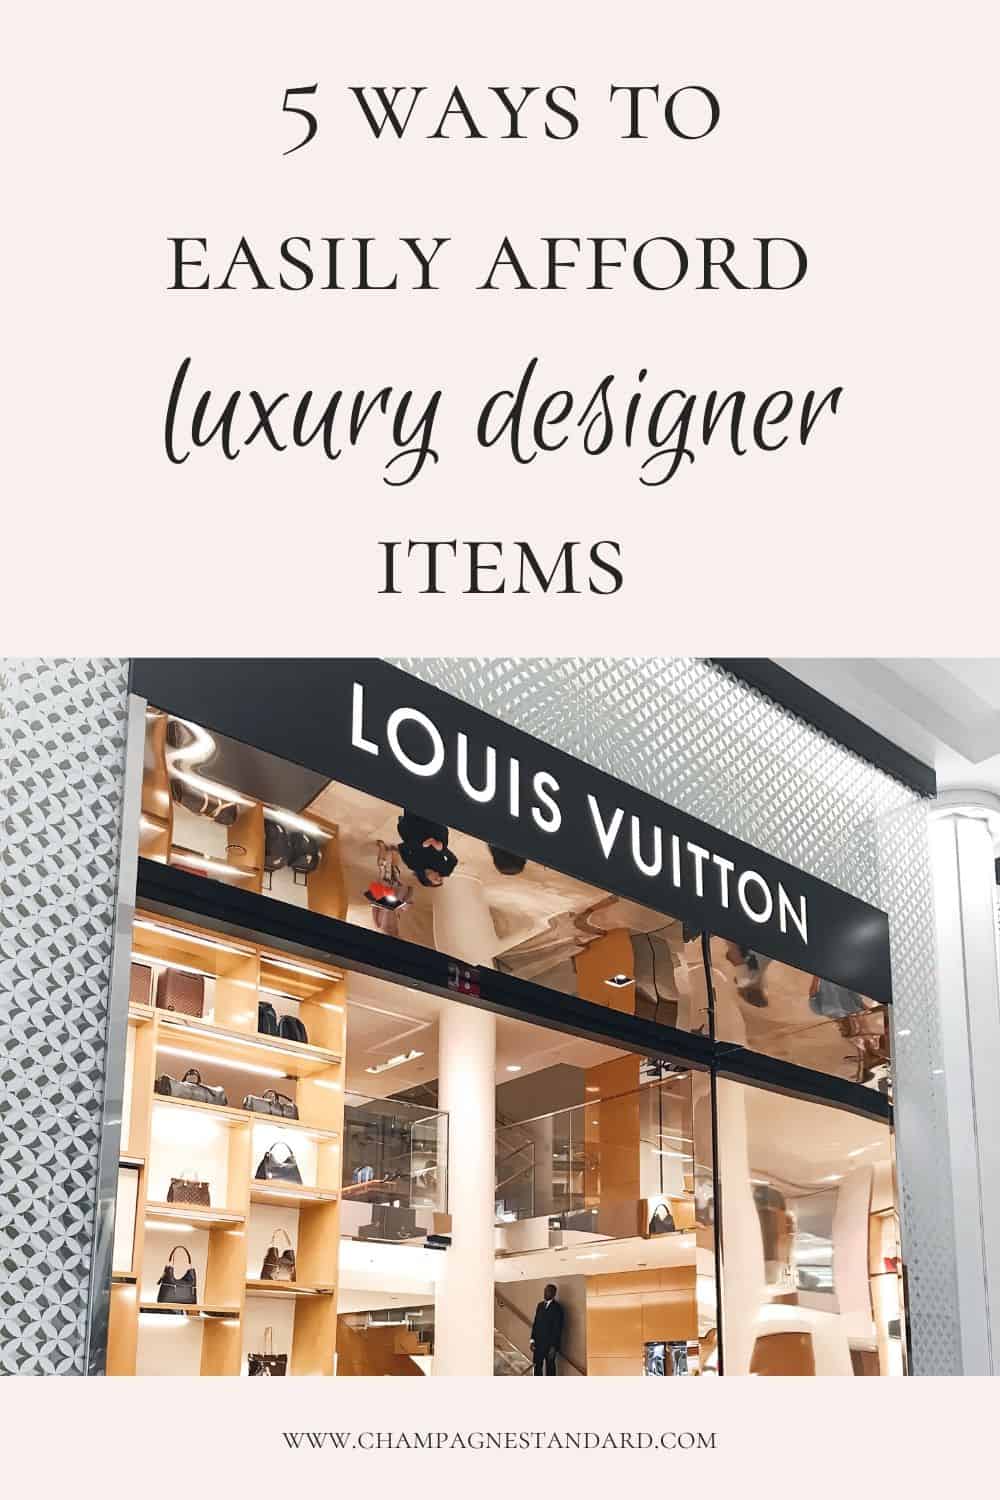 8 Tips On How To Afford Luxury Designer Items